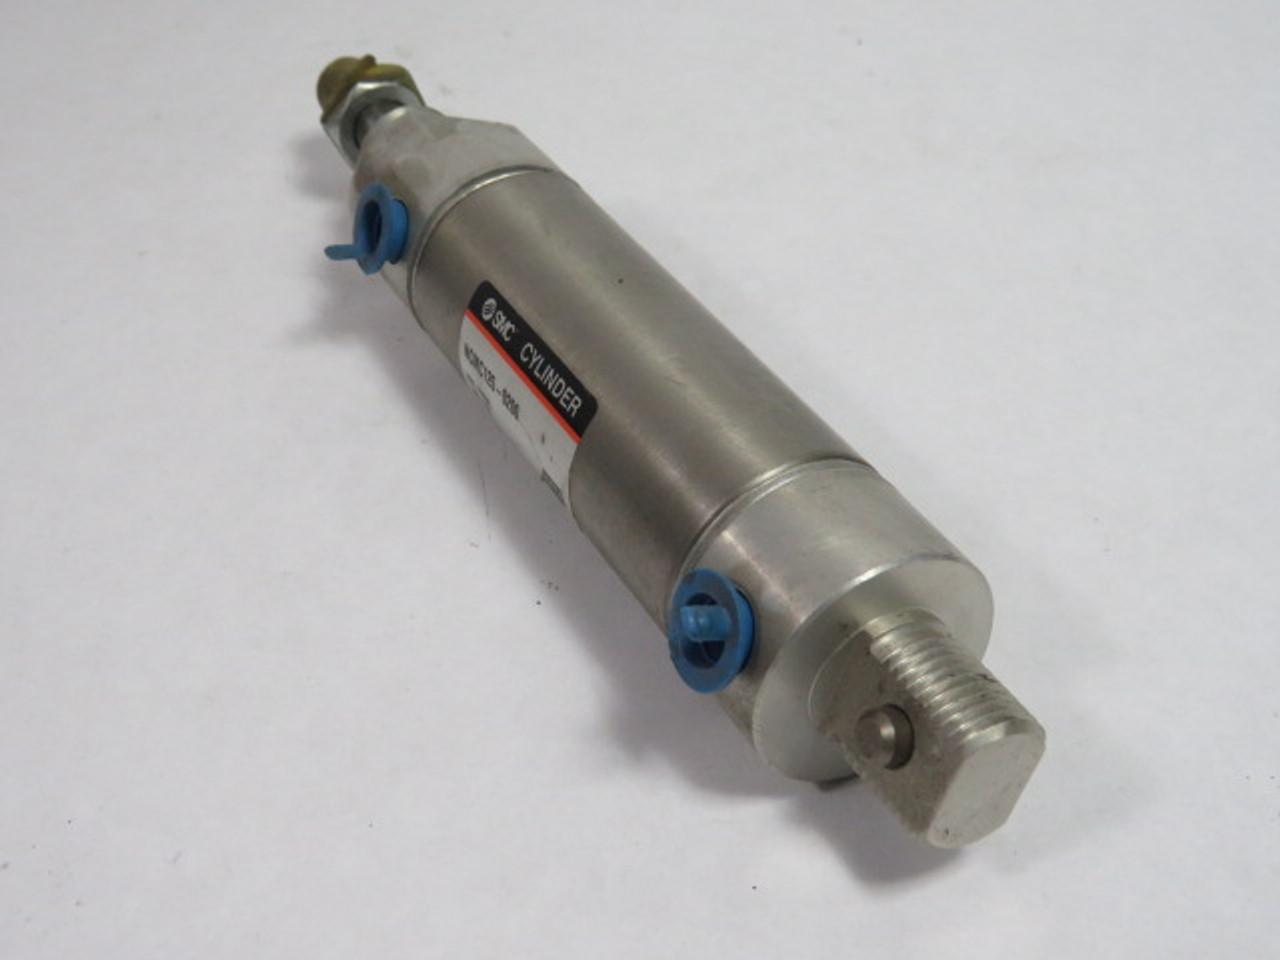 SMC NCMC125-0200 Pneumatic Air Cylinder 1-1/4" Bore 2" Stroke USED